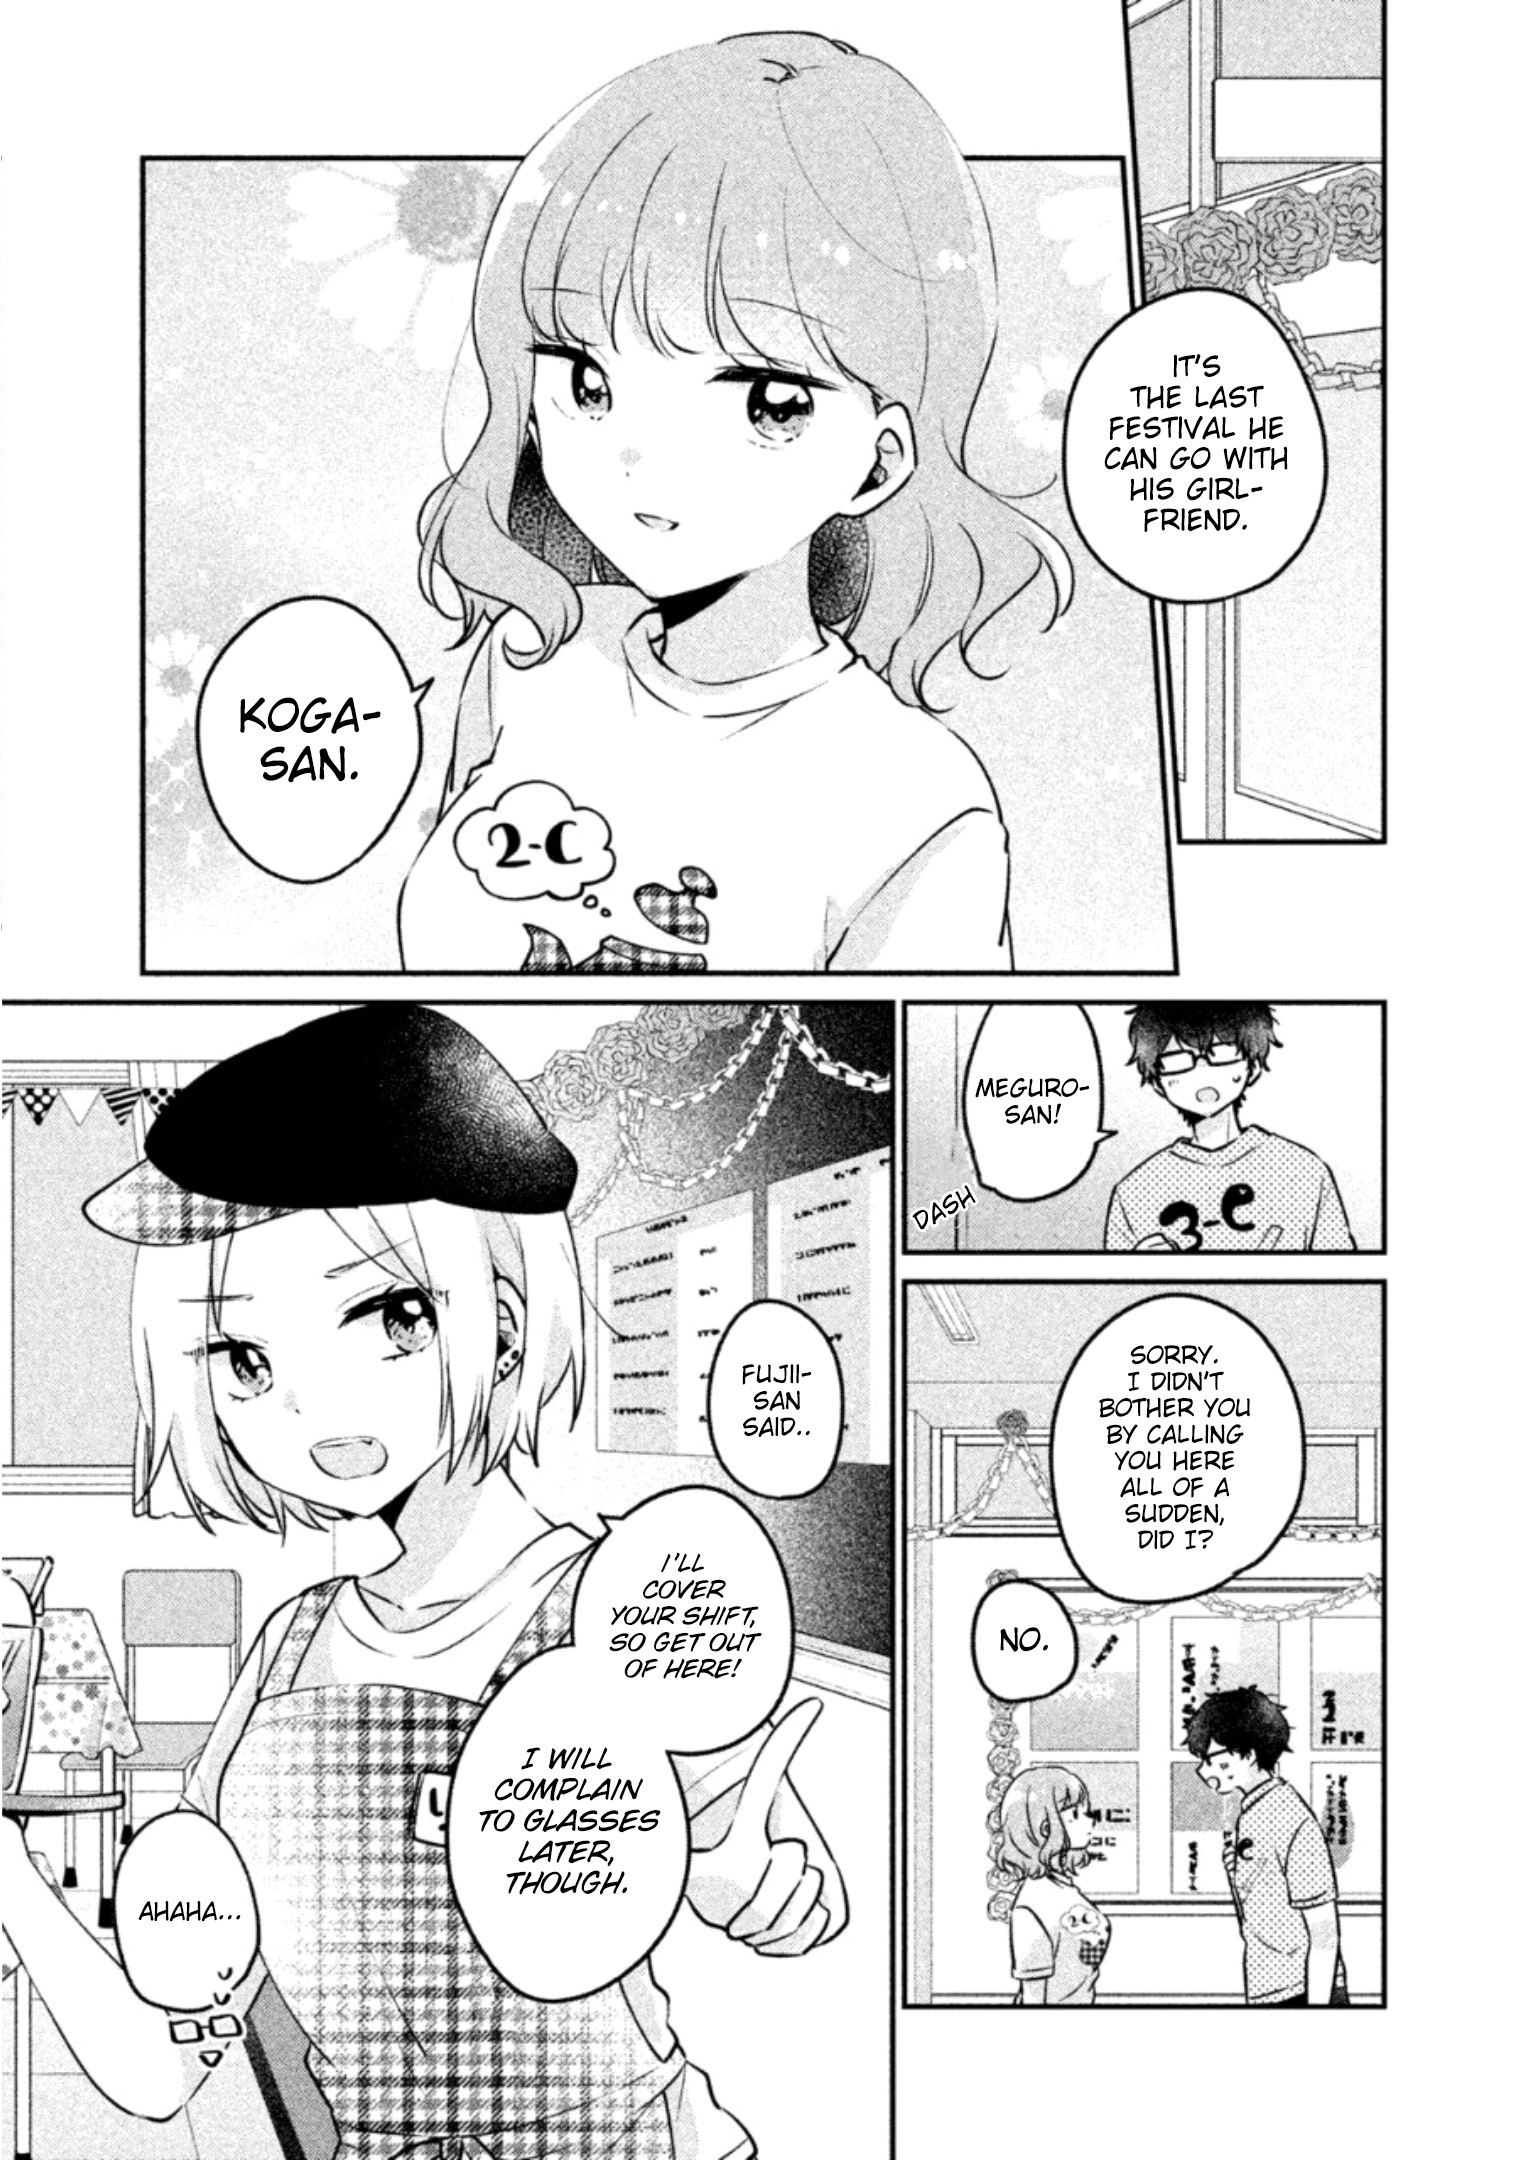 It's Not Meguro-san's First Time chapter 22 page 4